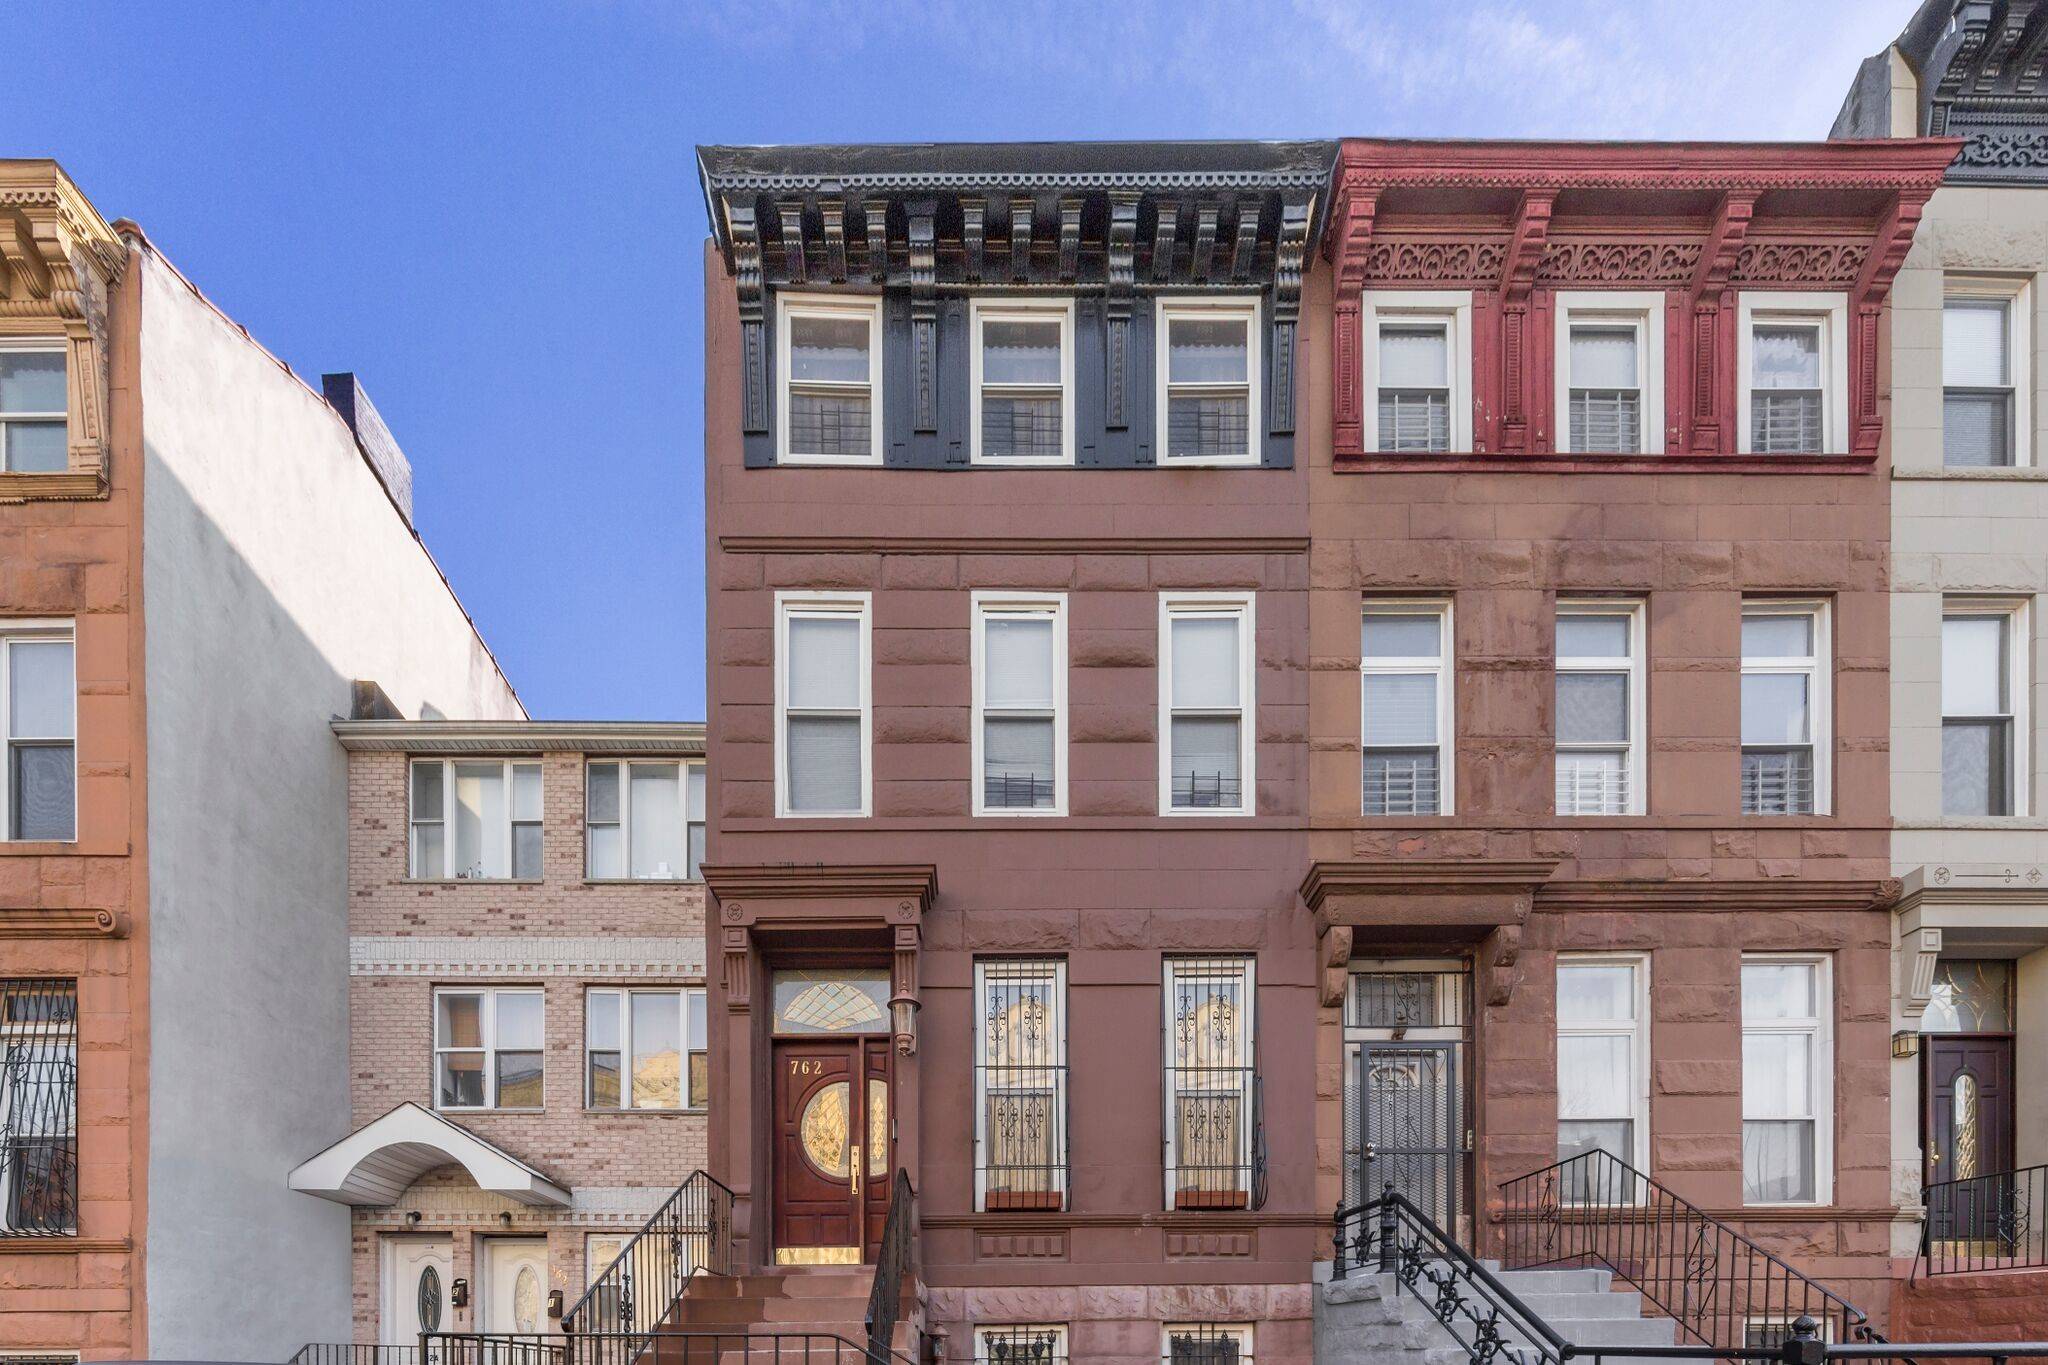 Classic 3 Family Brownstone In Bedford-Stuyvesant!